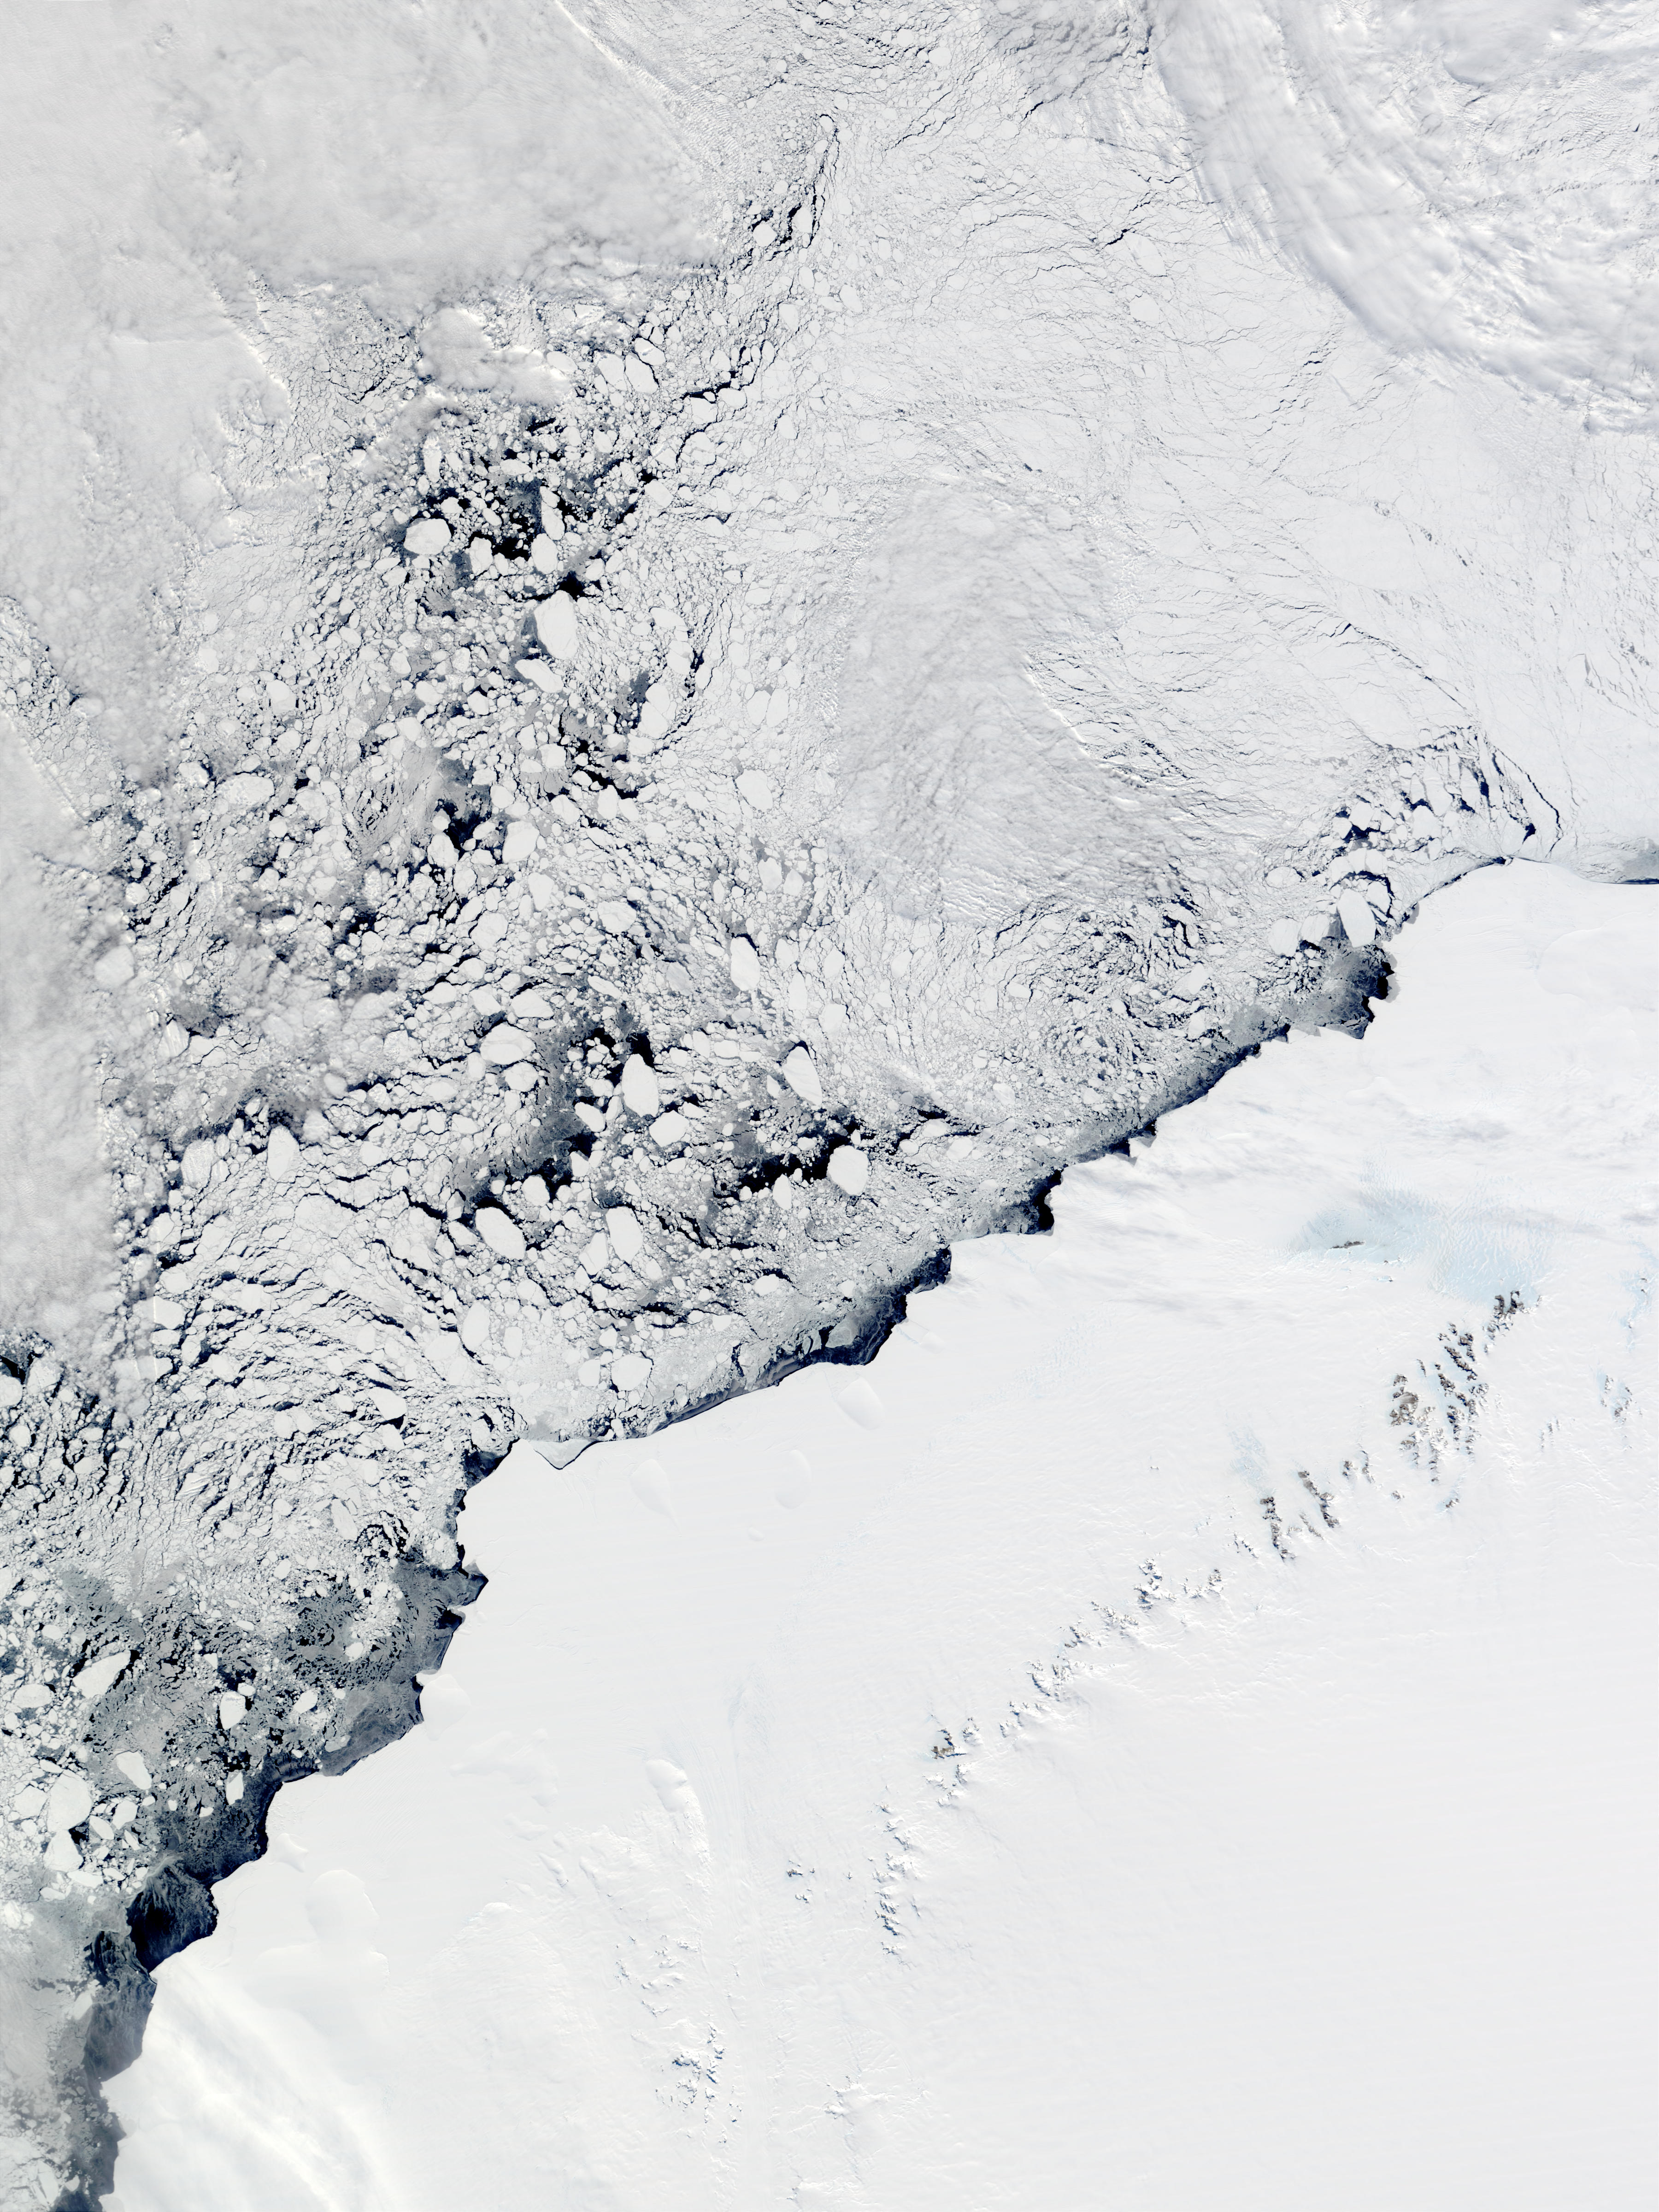 Fimbul Ice Shelf, Antarctica - related image preview